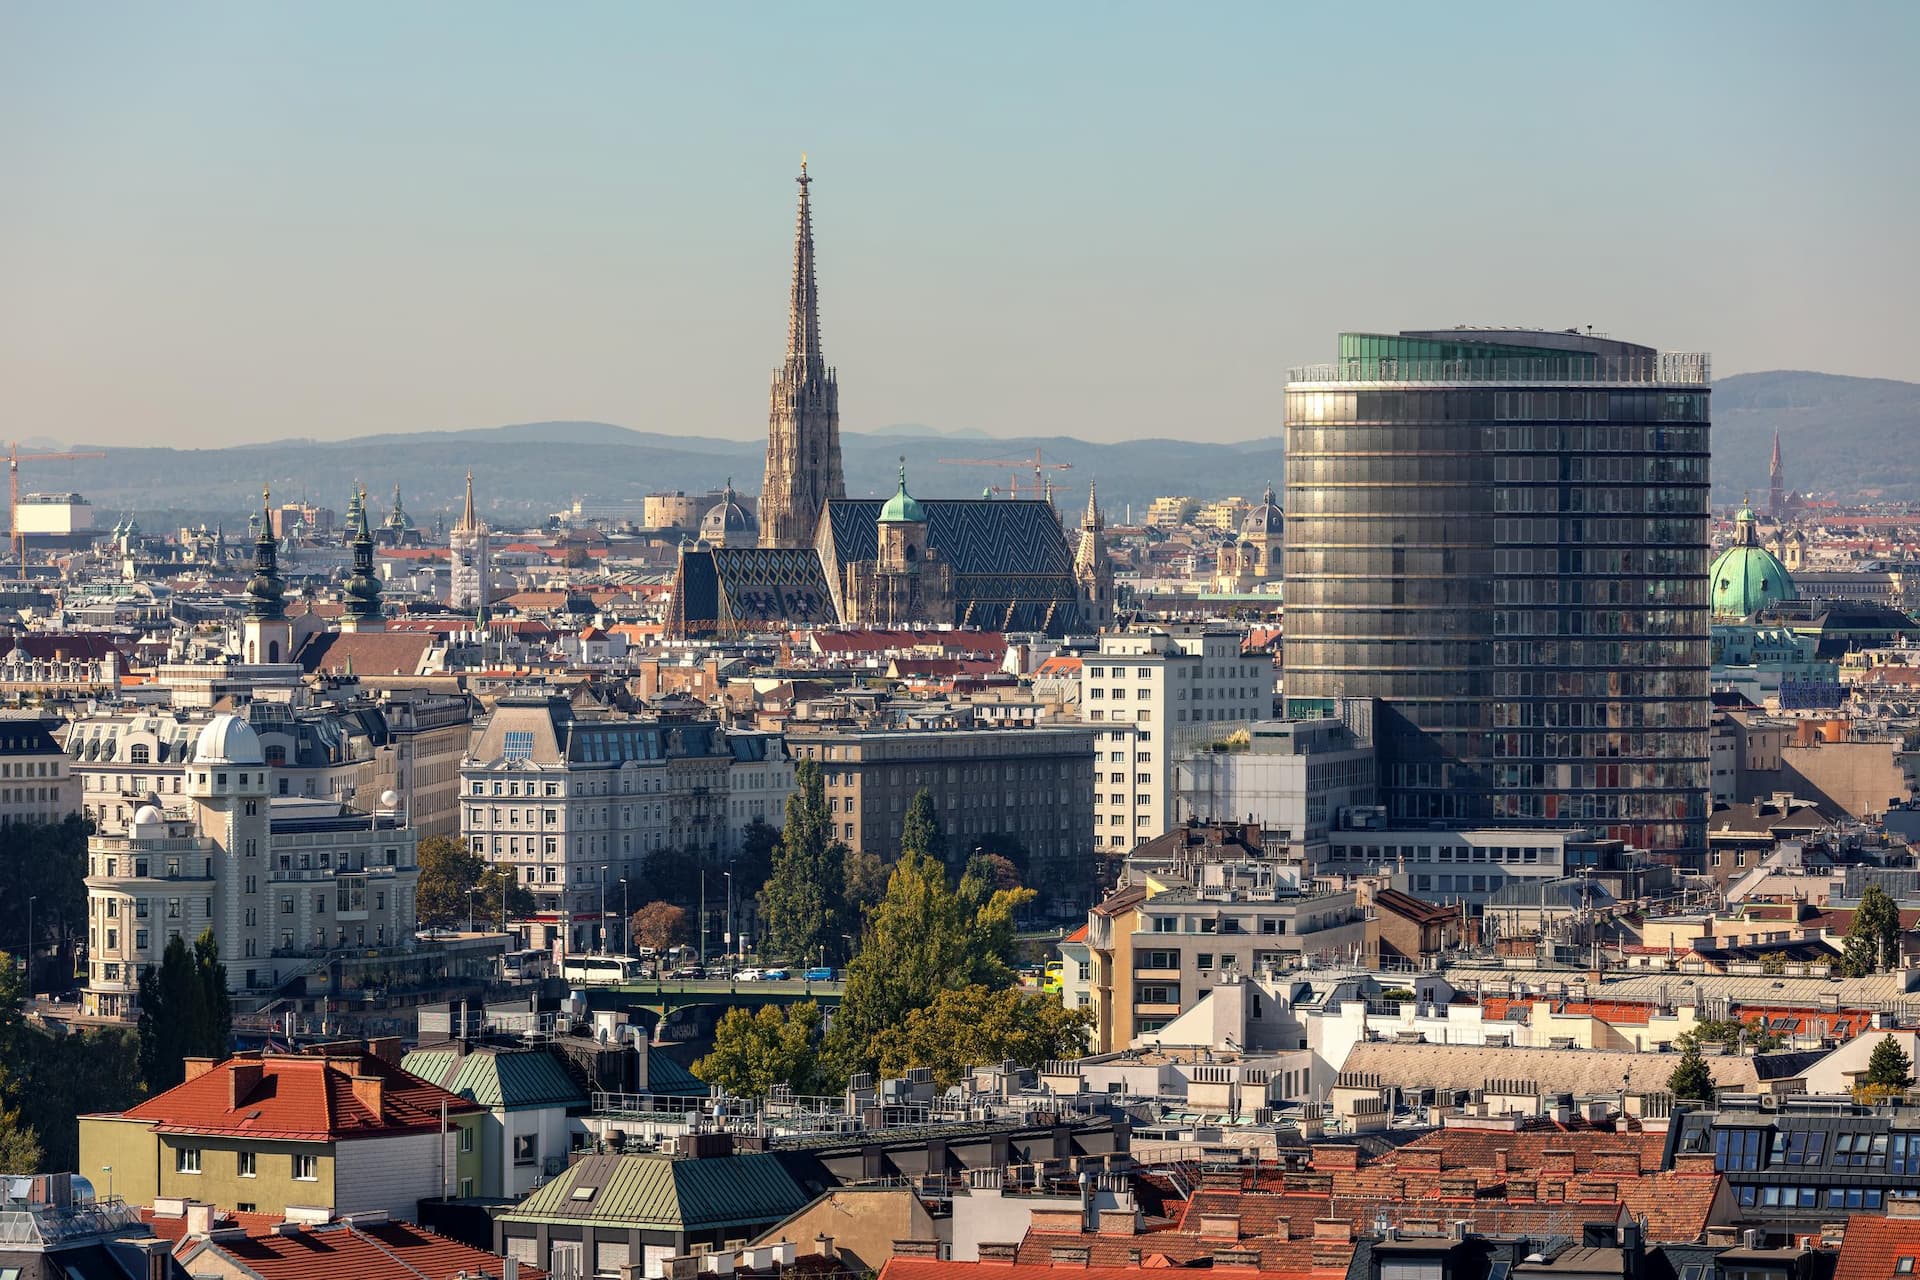 Aerial view of buildings and St. Stephen's Cathedral on background in historic part of Vienna, Austria.